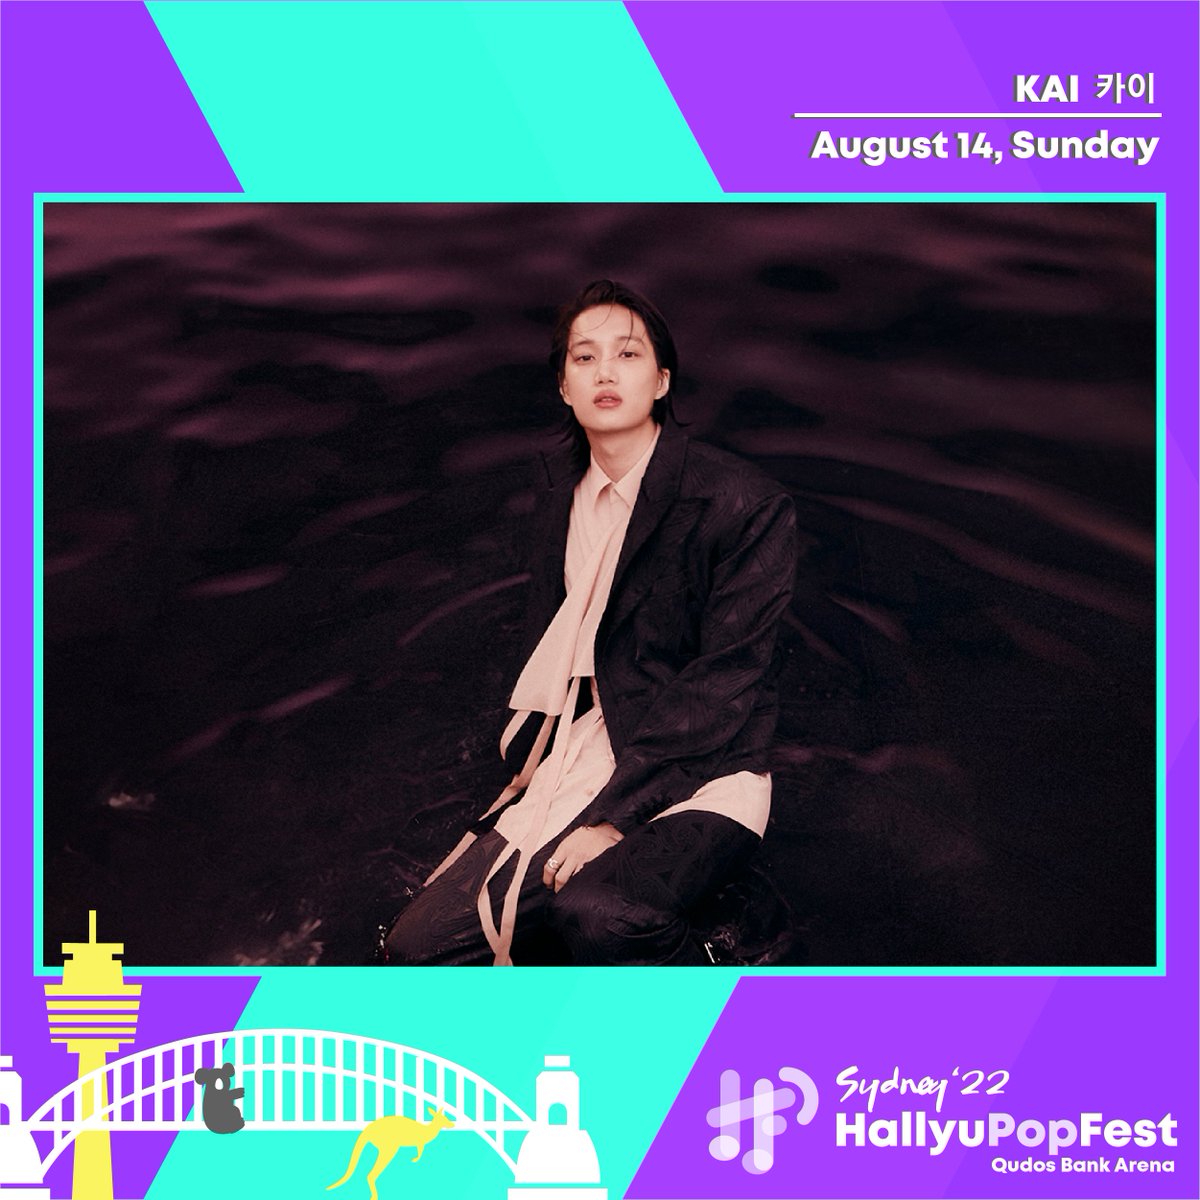 Australia! @weareoneEXO’s KAI is coming to you! ✨ #KAI #카이 will be joining us in our Sunday Line-up, on August 14 at #HPFSydney2022 #ComeIn to KAI’s world & #Mmmh with KAI as he shows you why he should be the #Reason you’re attending #HallyuPopFest in Sydney!